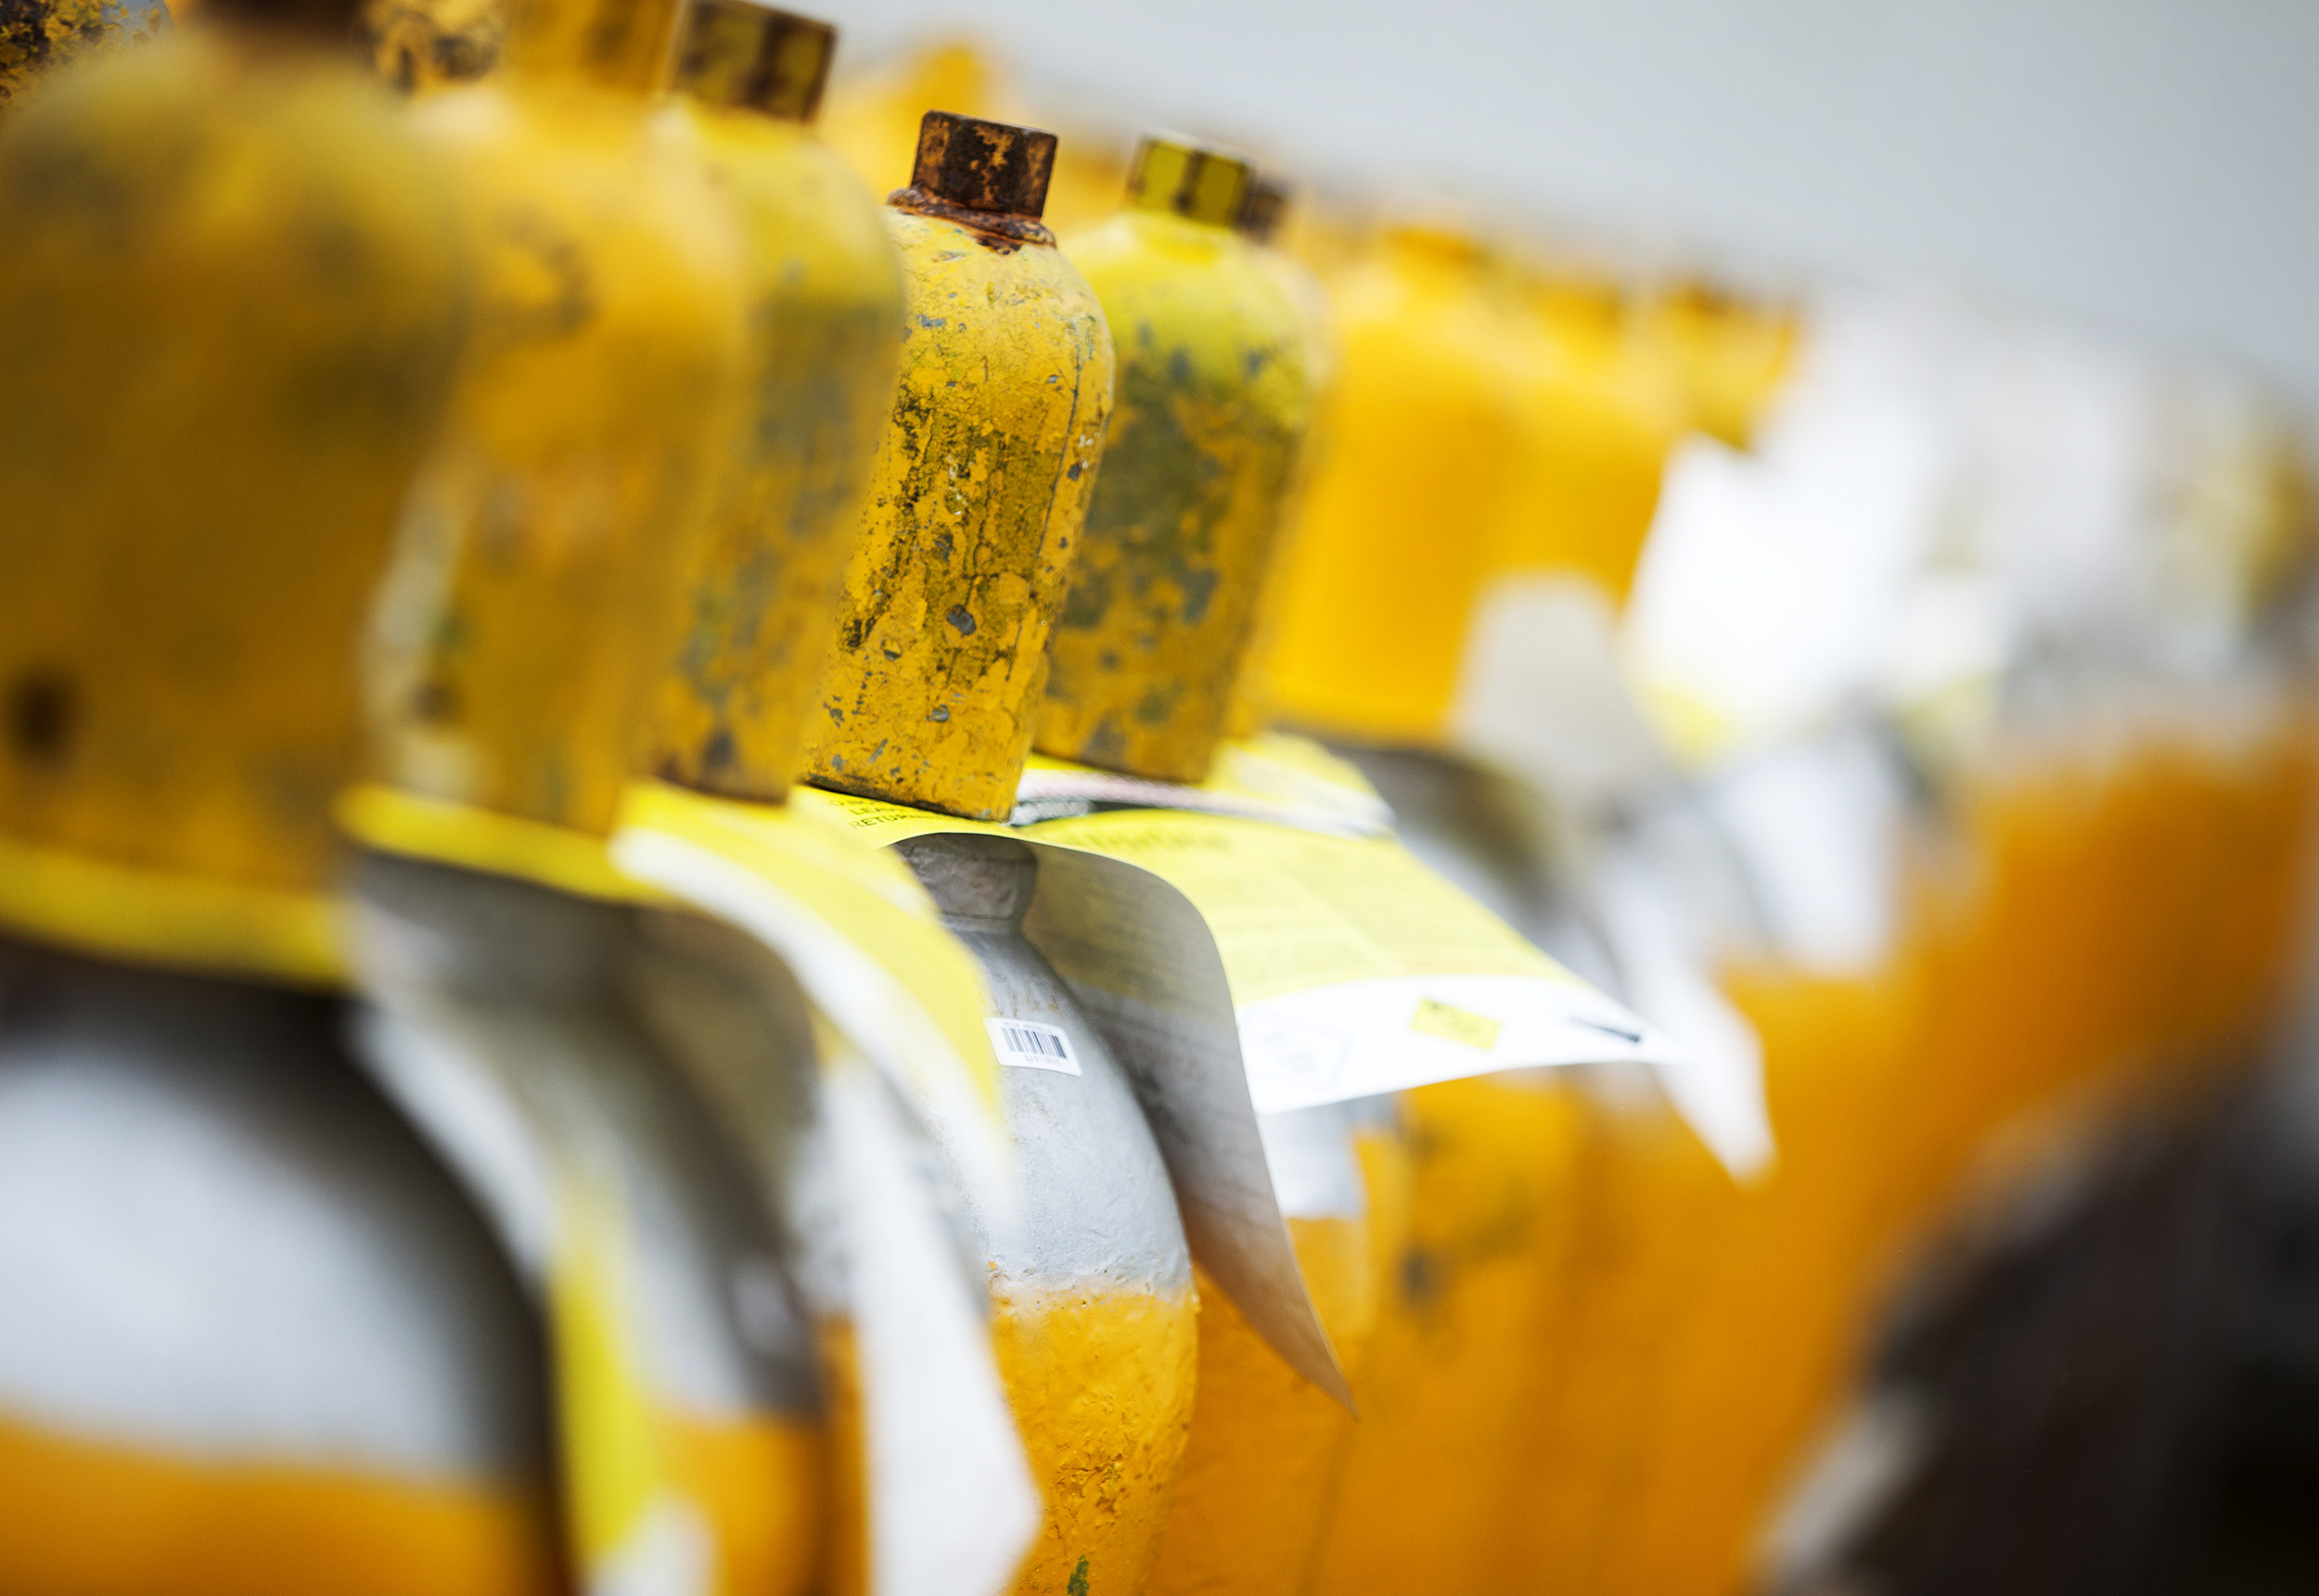 Yellow gas bottles in a line. Paul Scott Photography, industry.